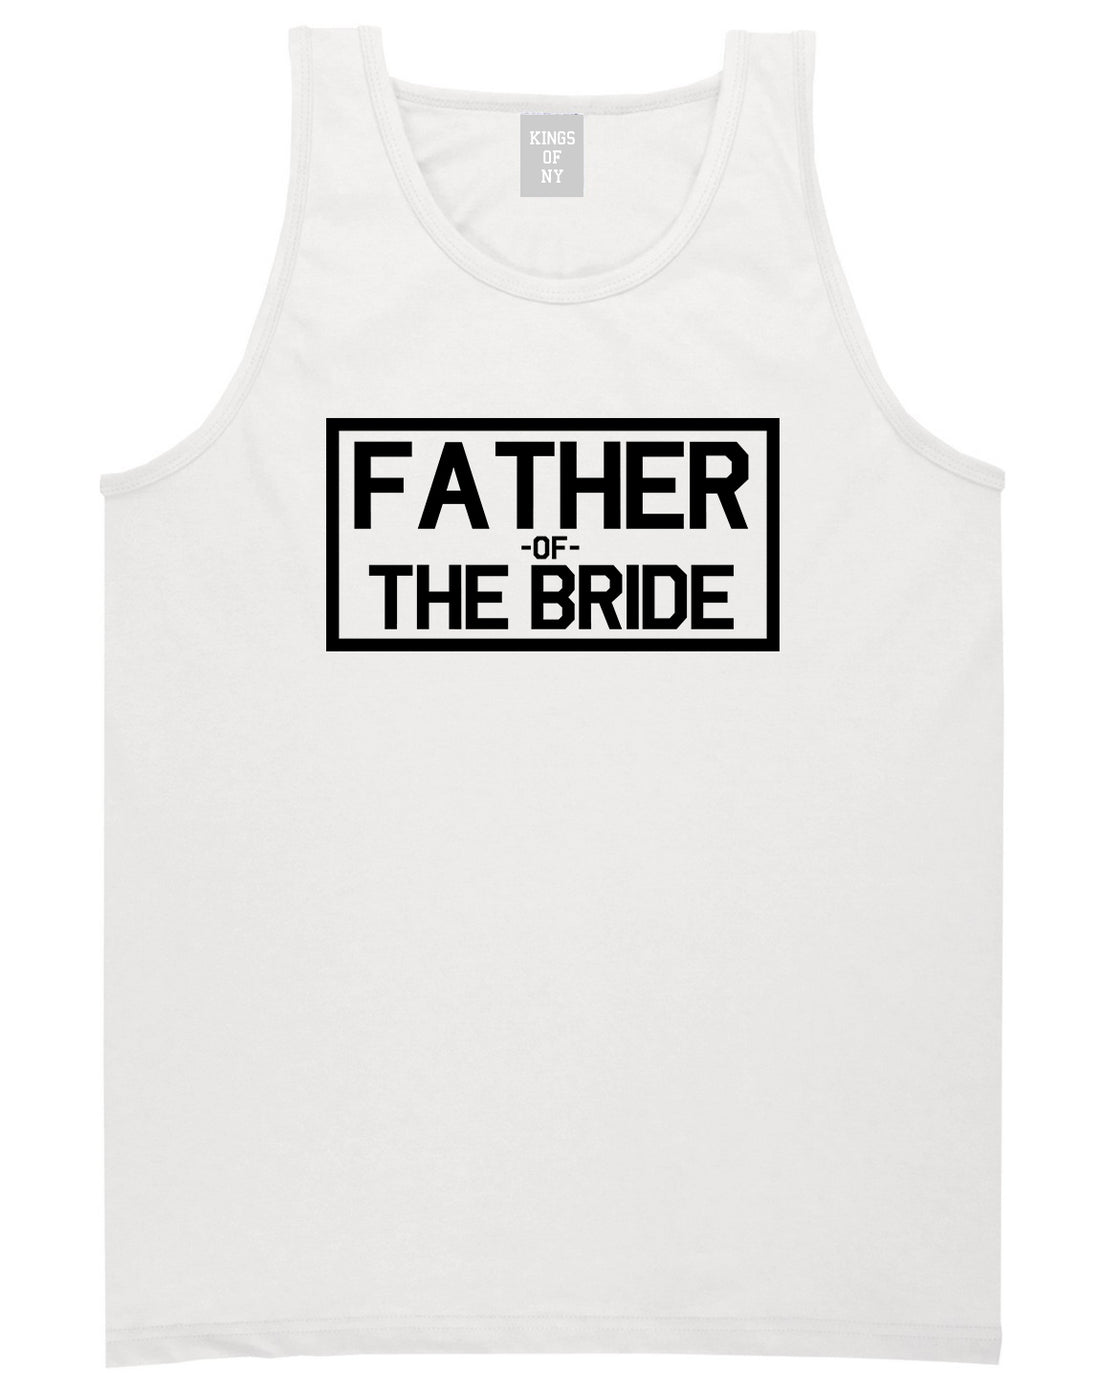 Father_Of_The_Bride Mens White Tank Top Shirt by Kings Of NY